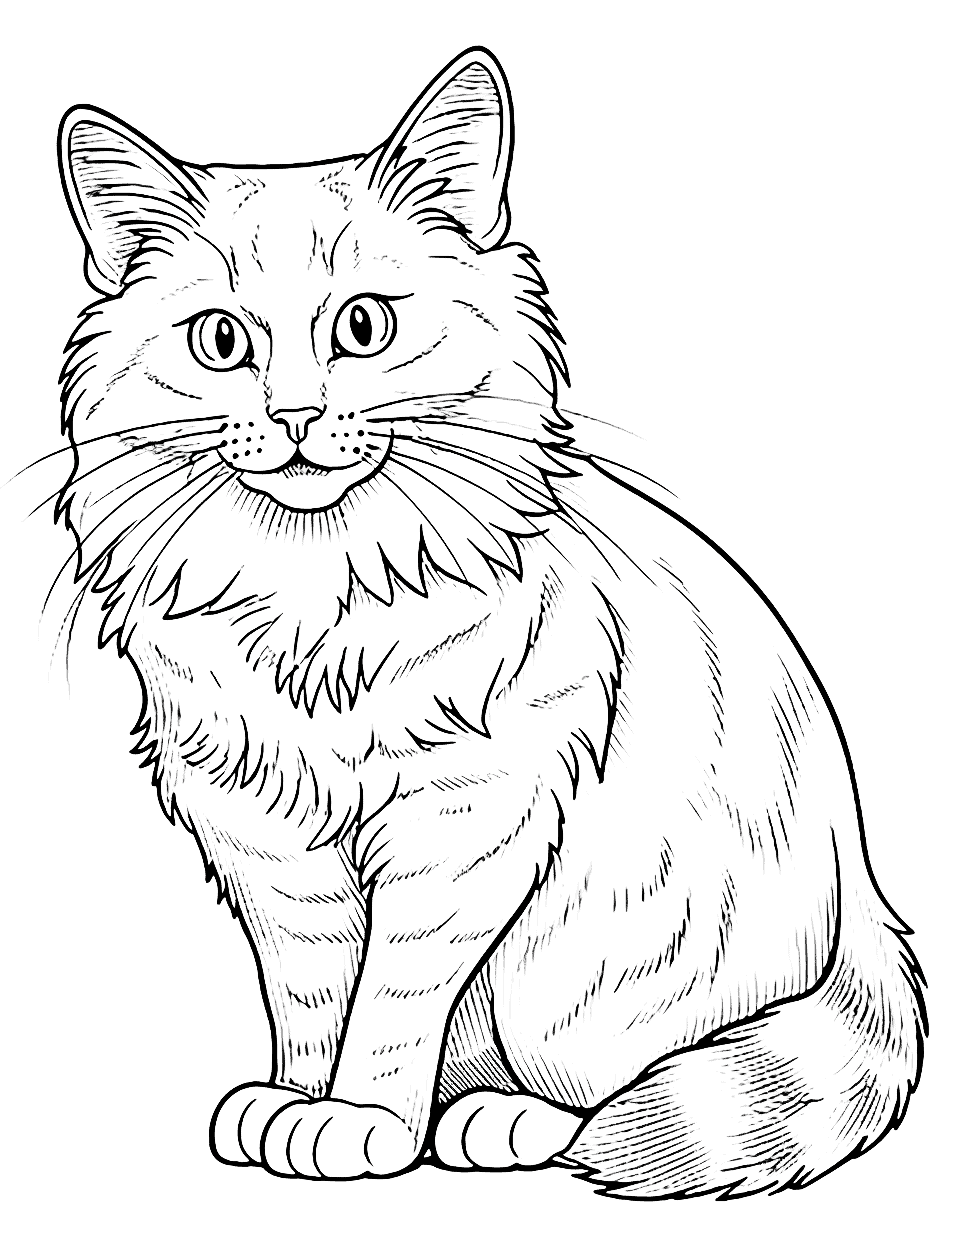 Realistic Maine Coon Cat Coloring Page - A detailed image of a Maine Coon cat with its distinctive ears and long tail.